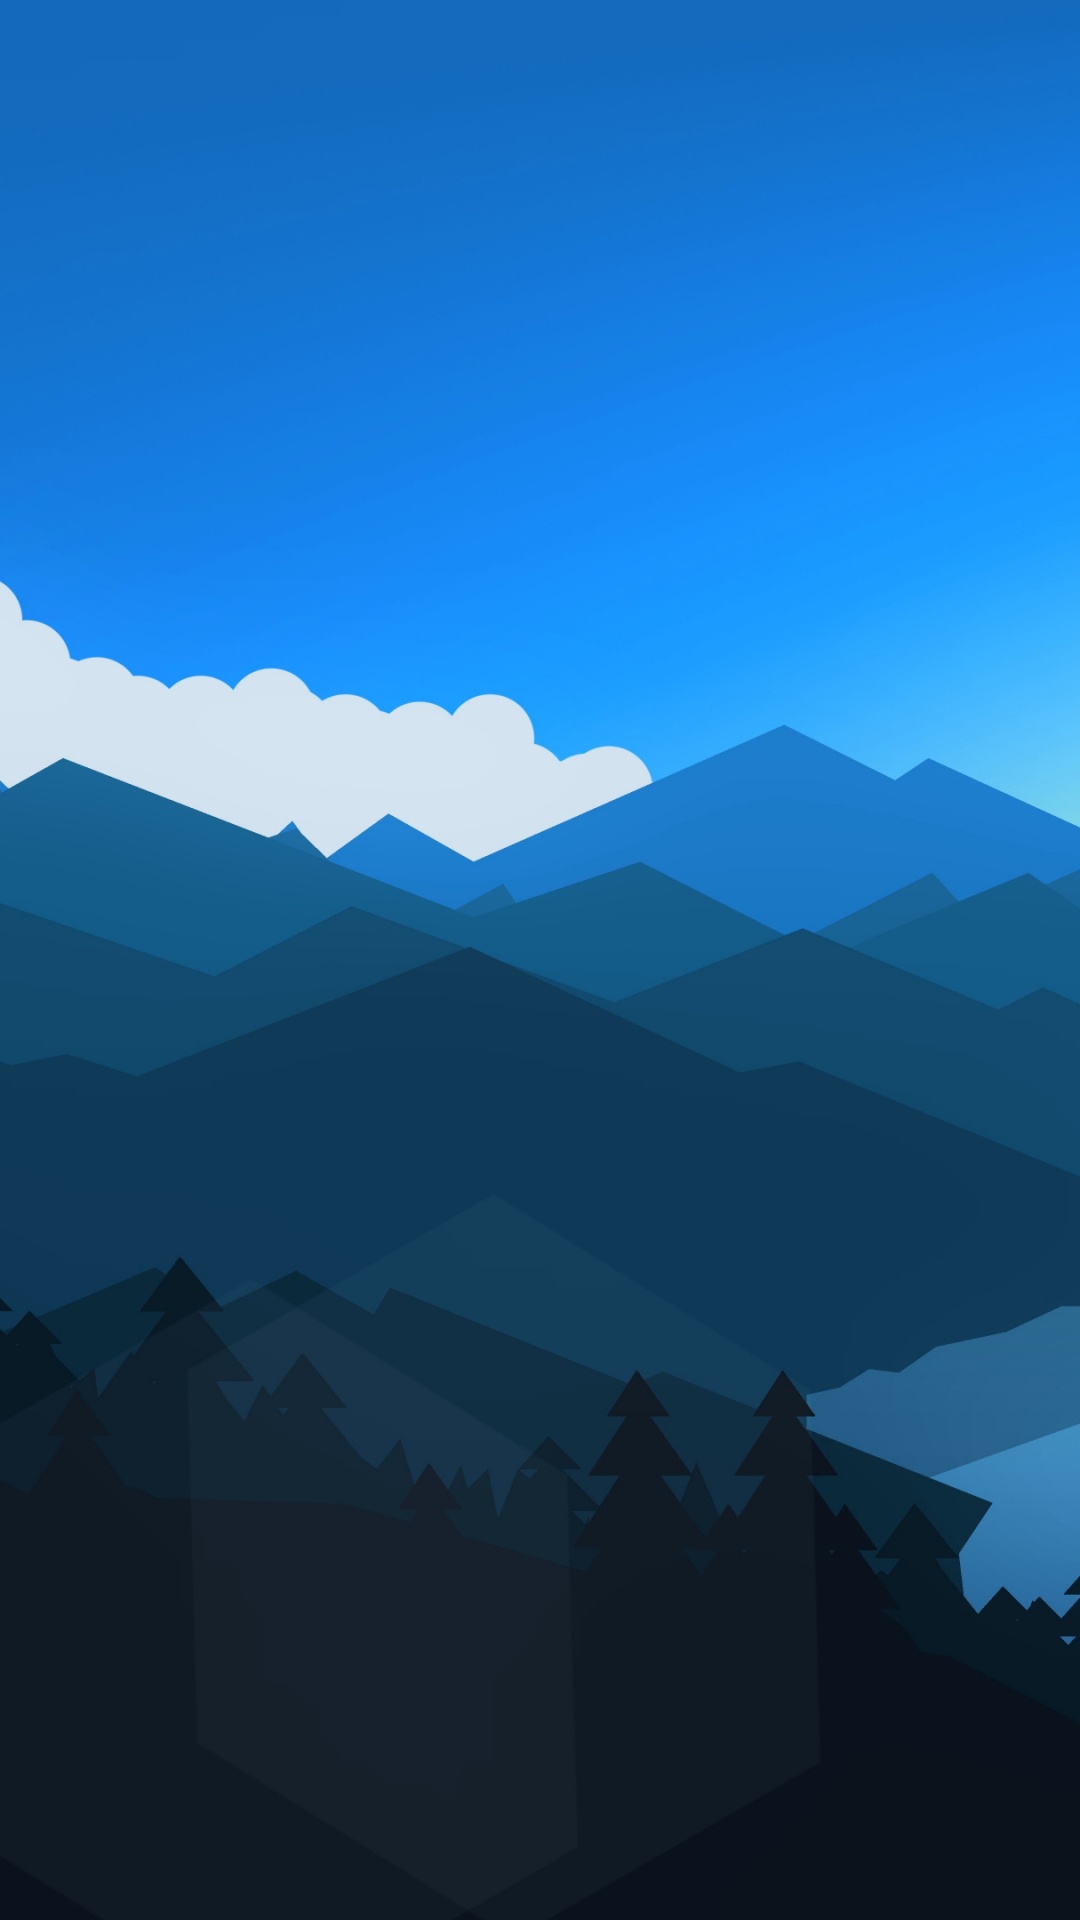 Silhouette of Mountain Under Blue Sky During Daytime. Wallpaper in 1080x1920 Resolution